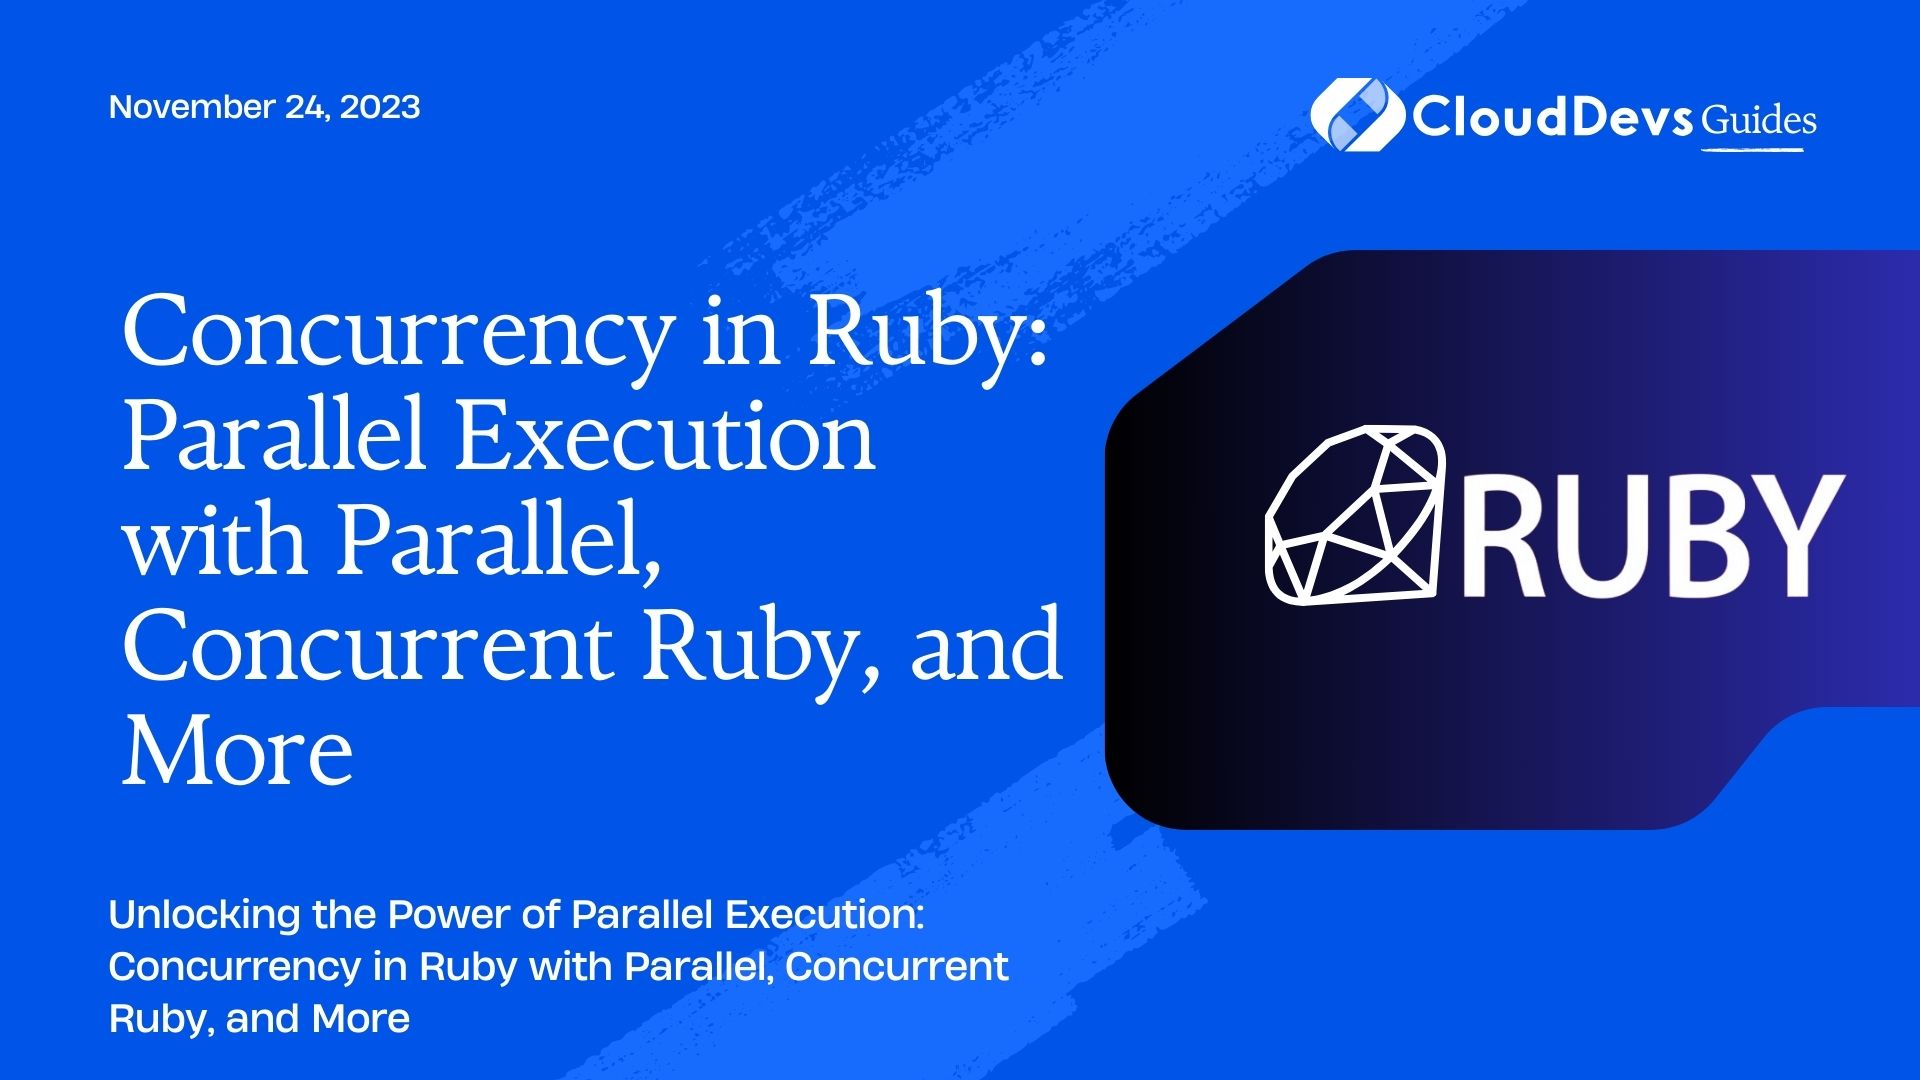 Concurrency in Ruby: Parallel Execution with Parallel, Concurrent Ruby, and More